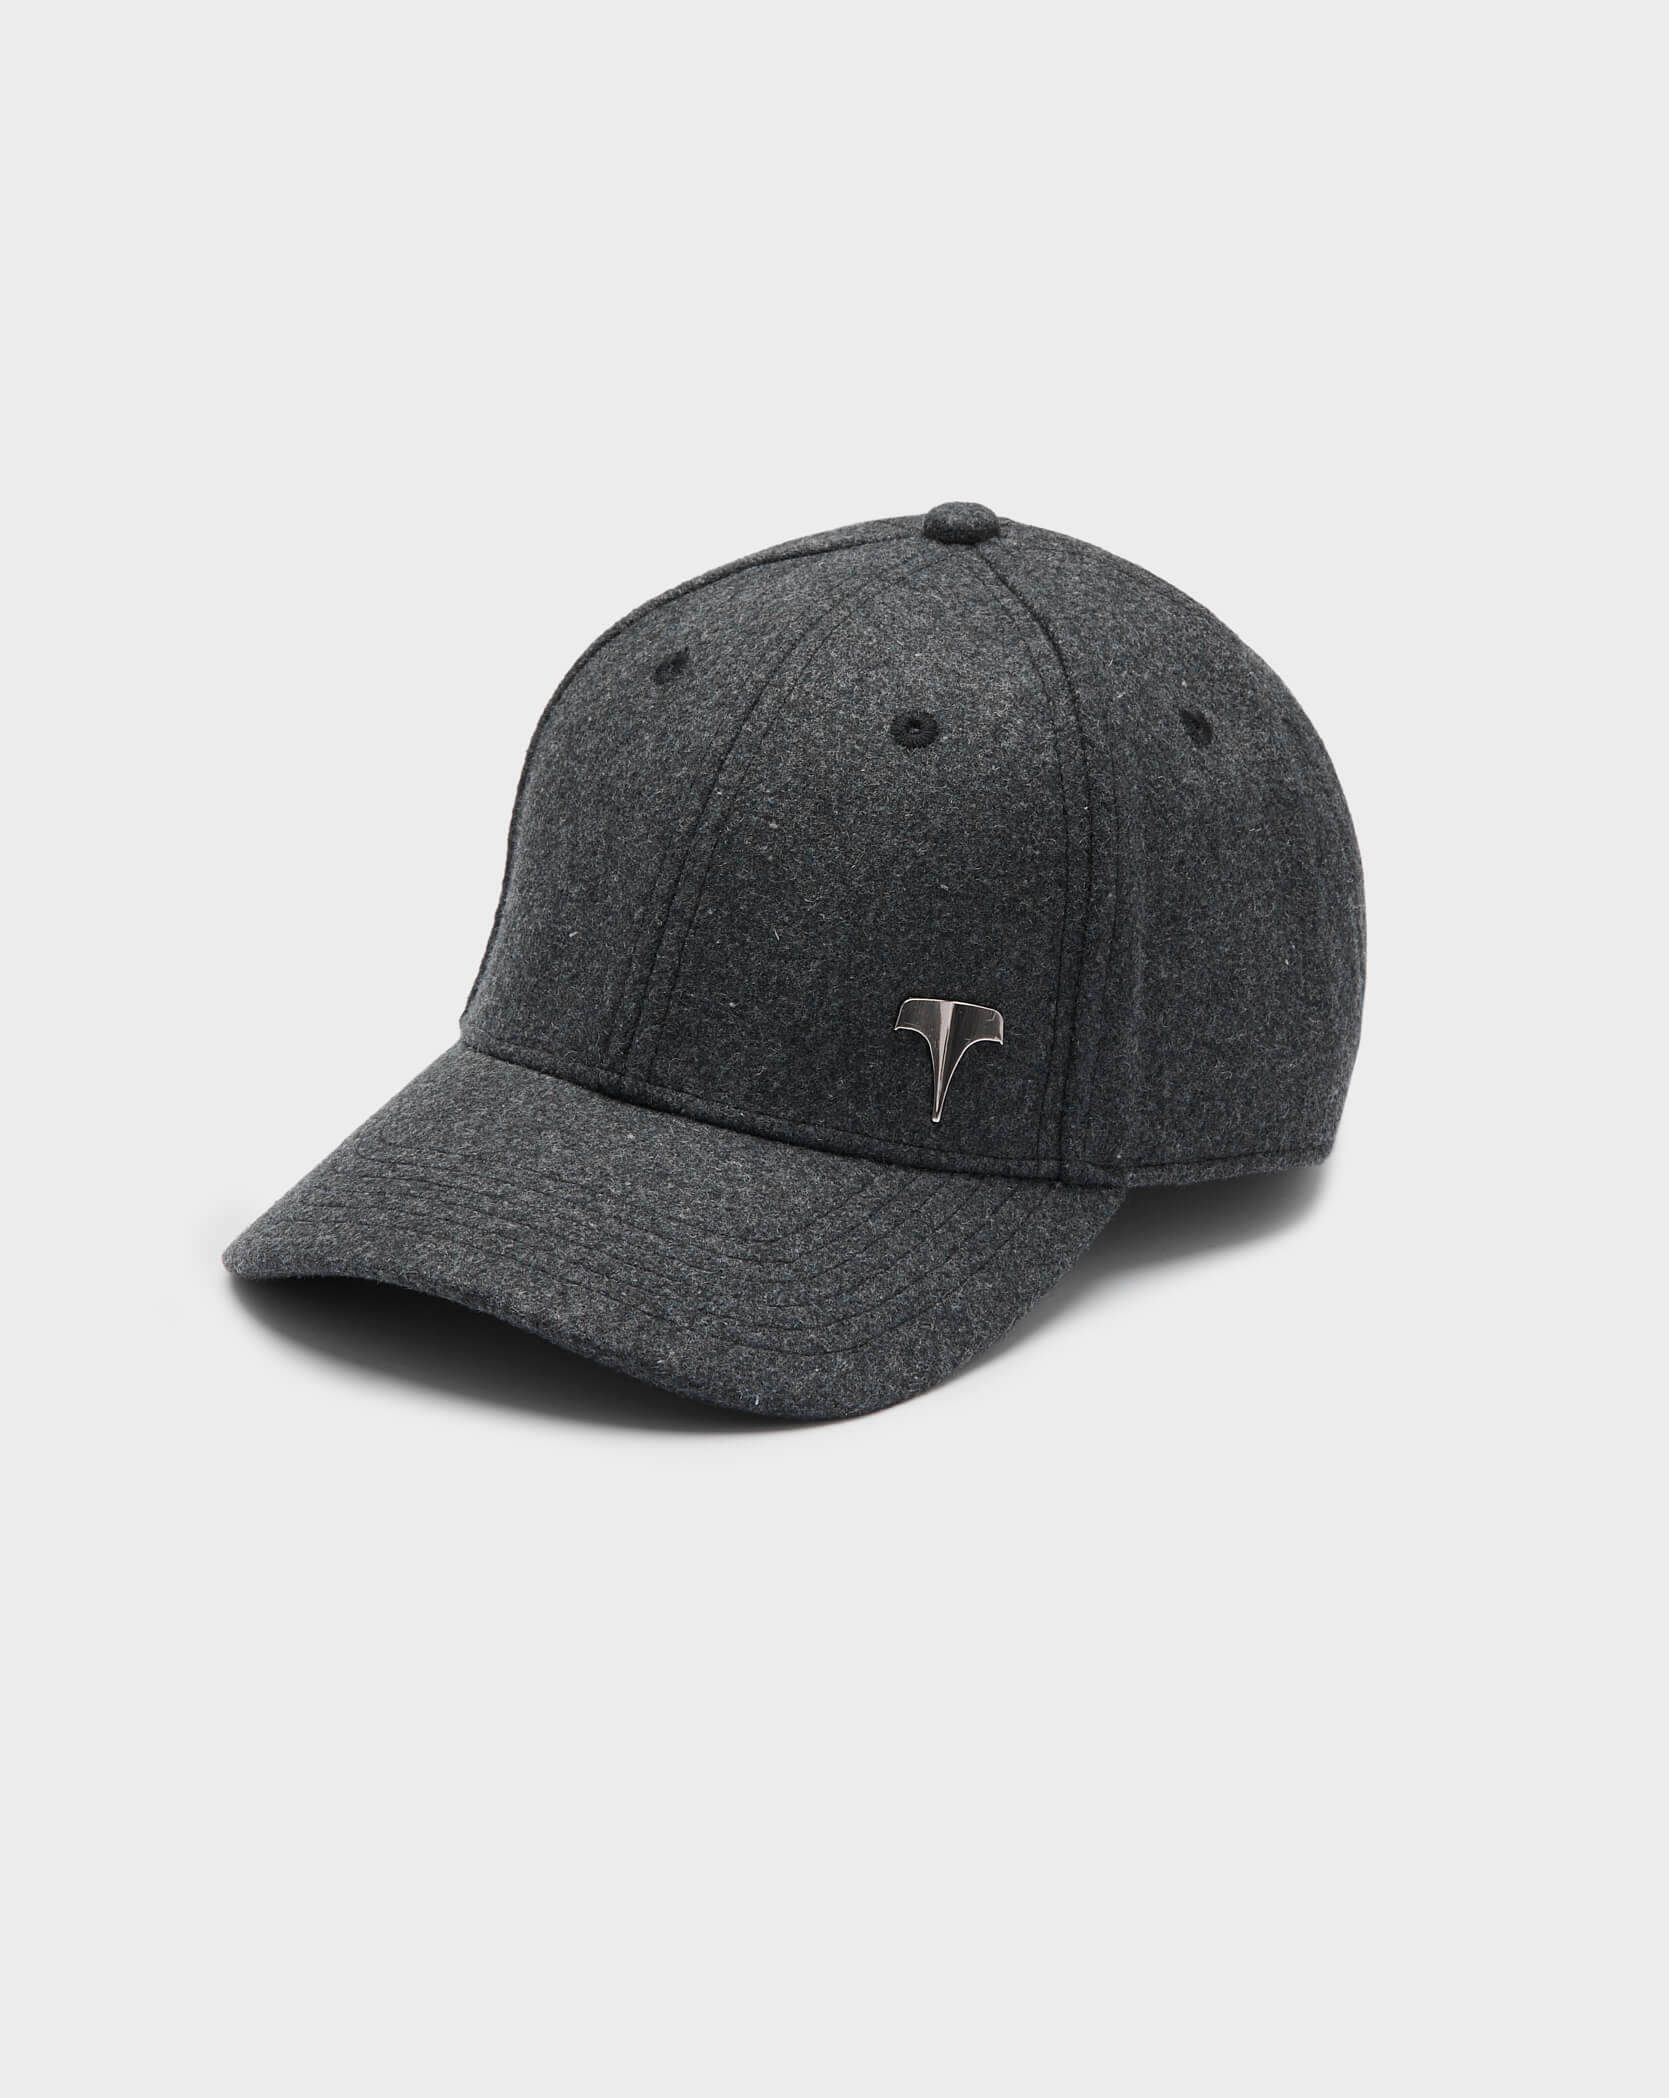 Twinzz grey pitcher cap with small silver logo